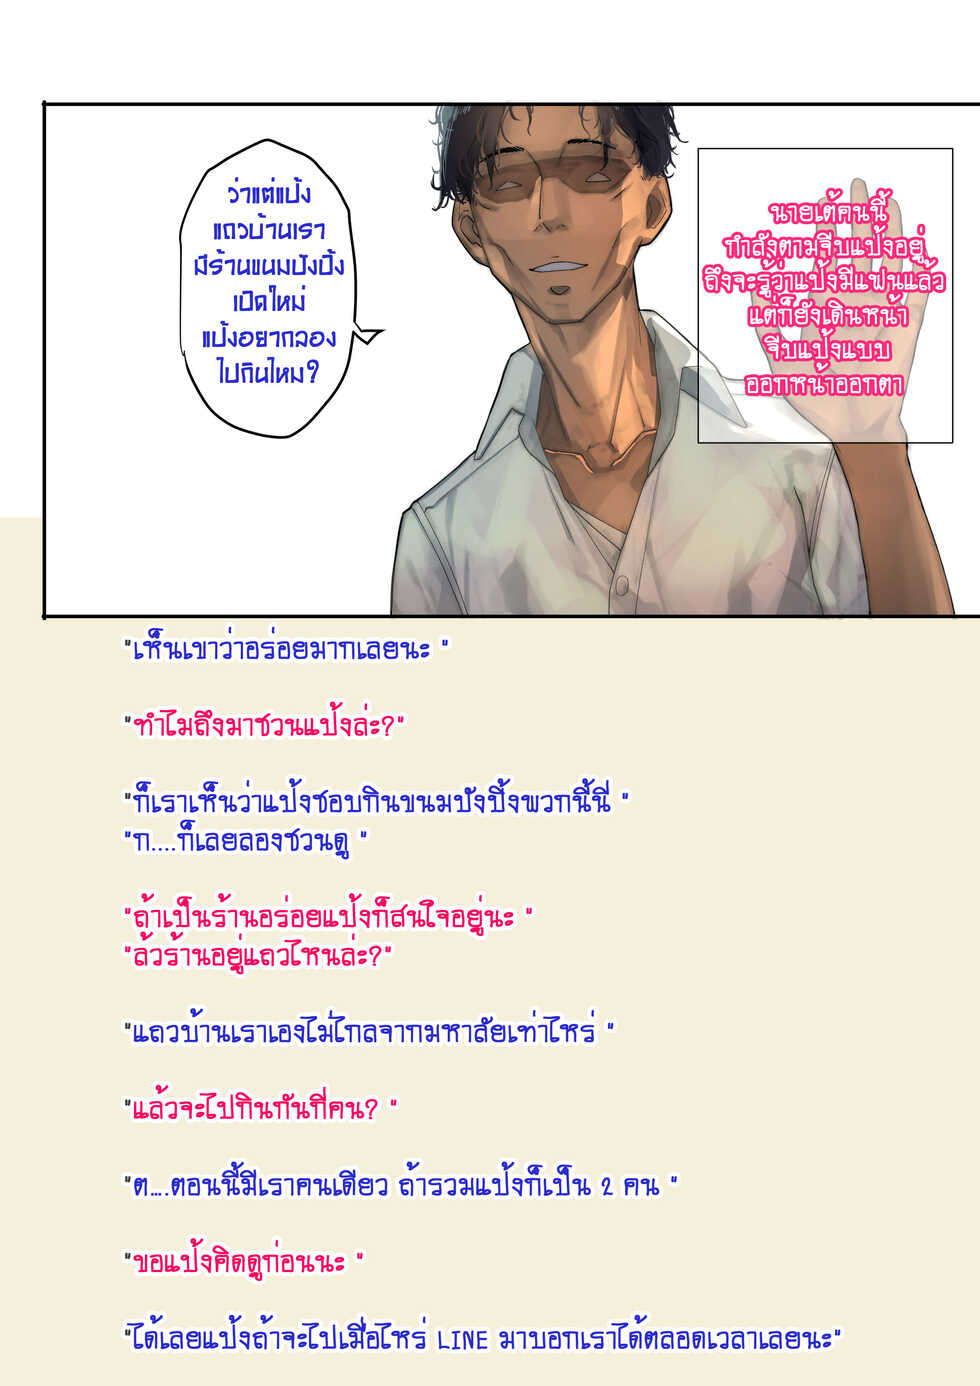 [9LiKiN (Dyed flowers)] - แป้ง(PANG) - - Page 16